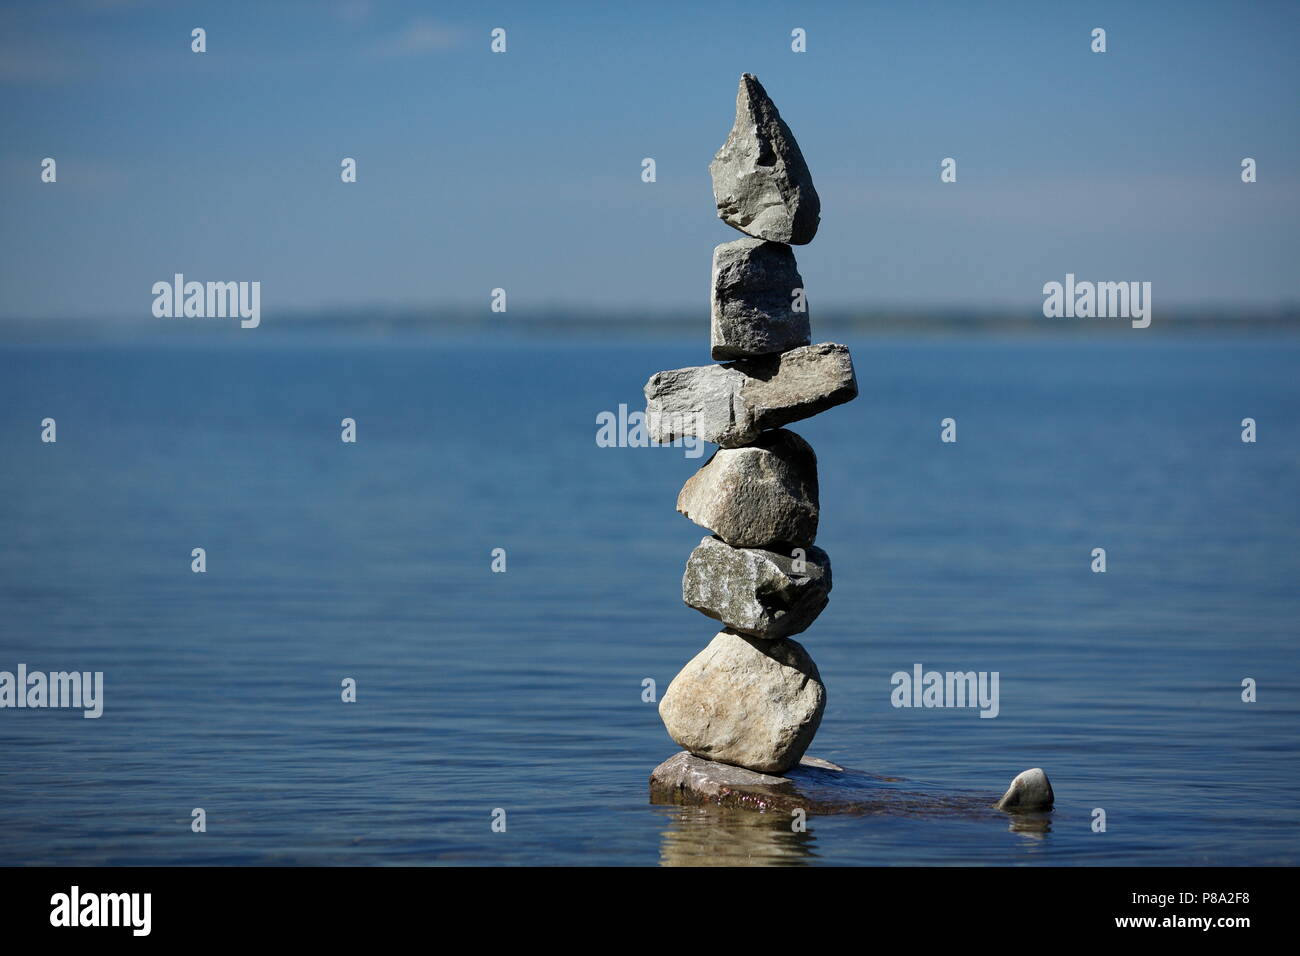 Stone sculpture, Saint Lawrence River, Quebec Province, Canada Stock Photo